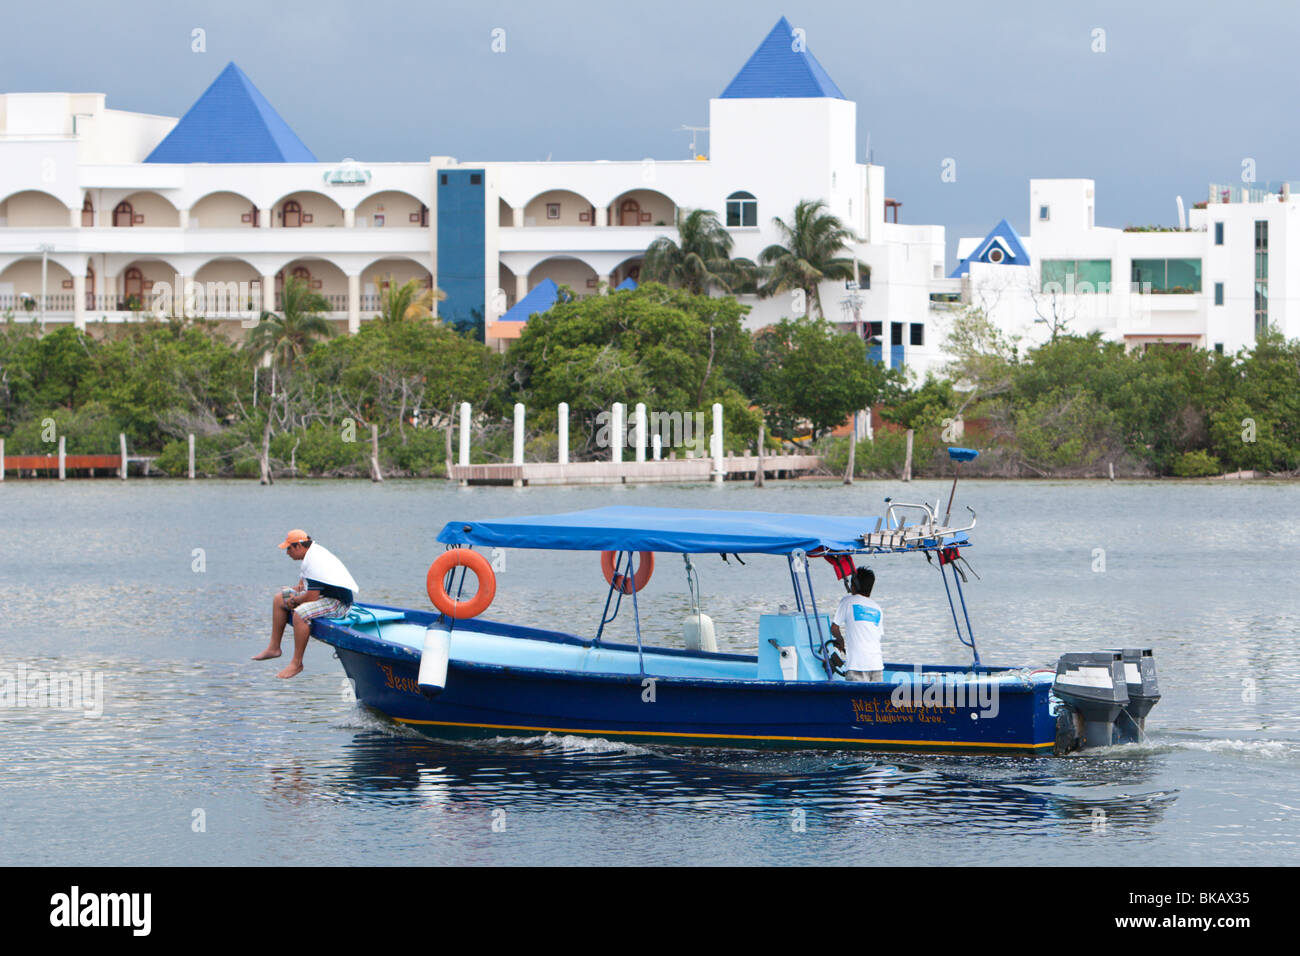 A local fishing/tour boat cruises through the lagoon on the island of Isla Mujeres near Cancun, Mexico Stock Photo